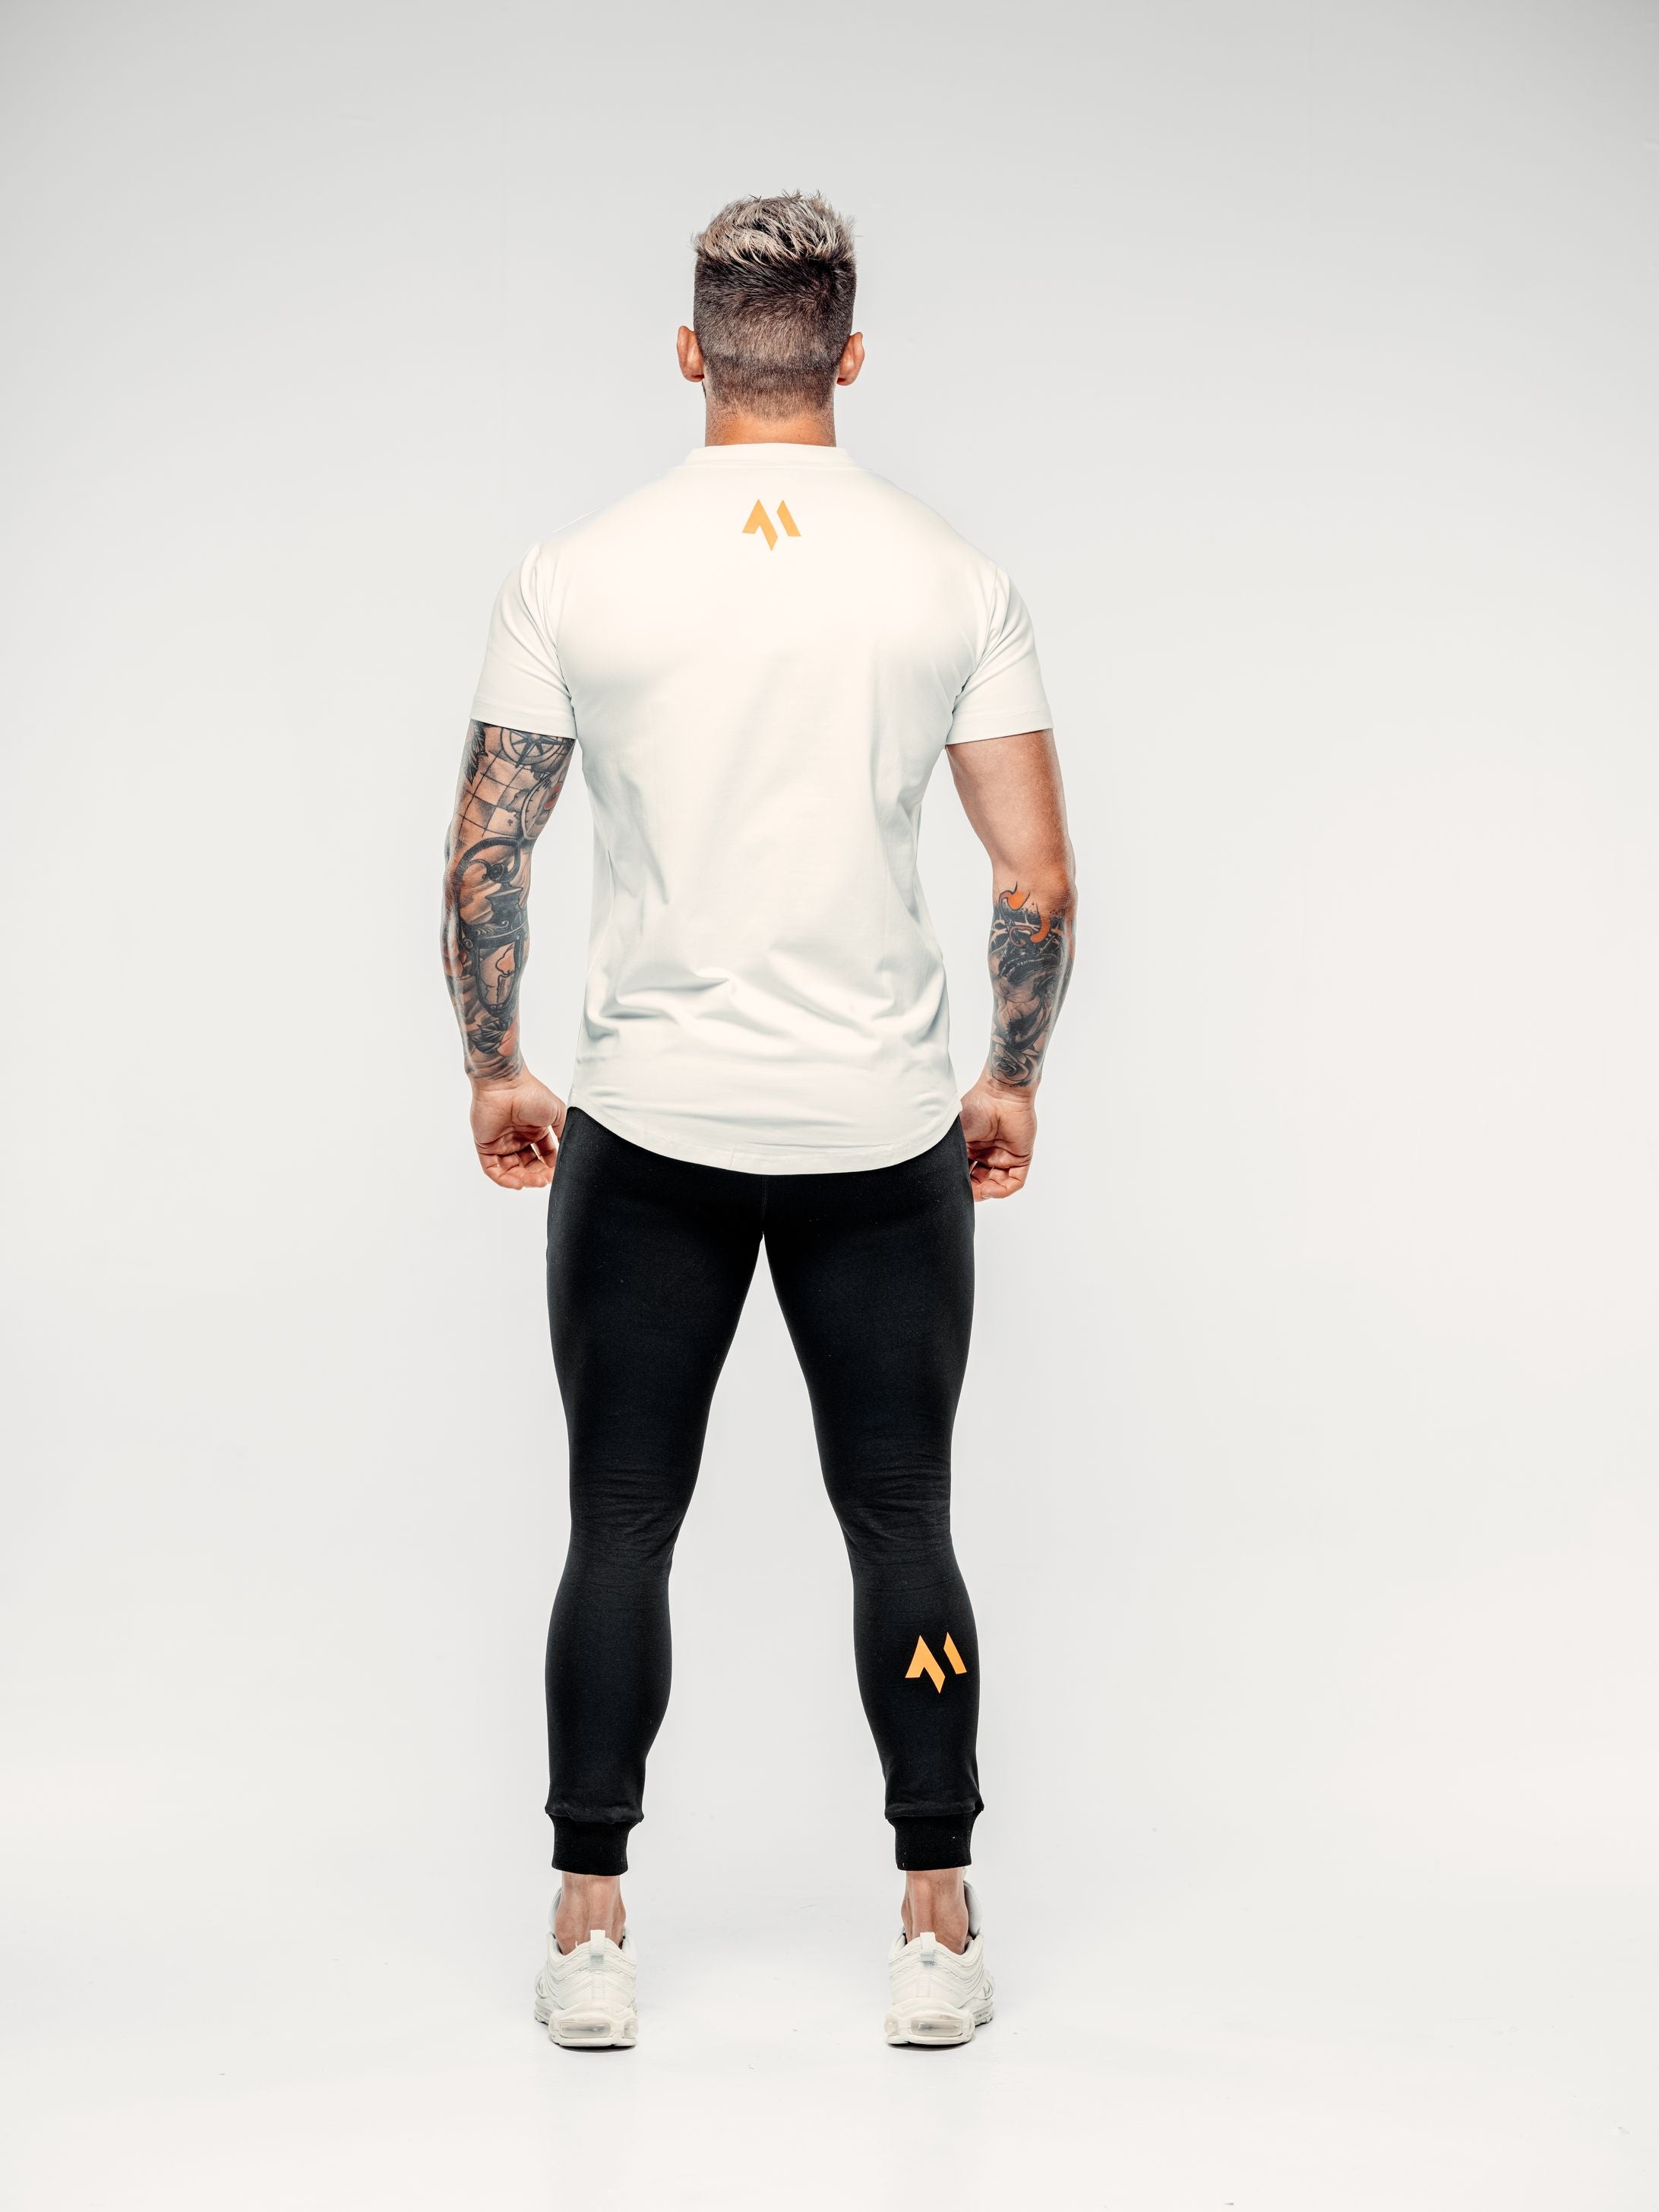 This is a rear view of Shane wearing the new standard long line t-shirt in white and the new standard joggers in black.  It showcases the emblem in orange on the t-shirt and trousers